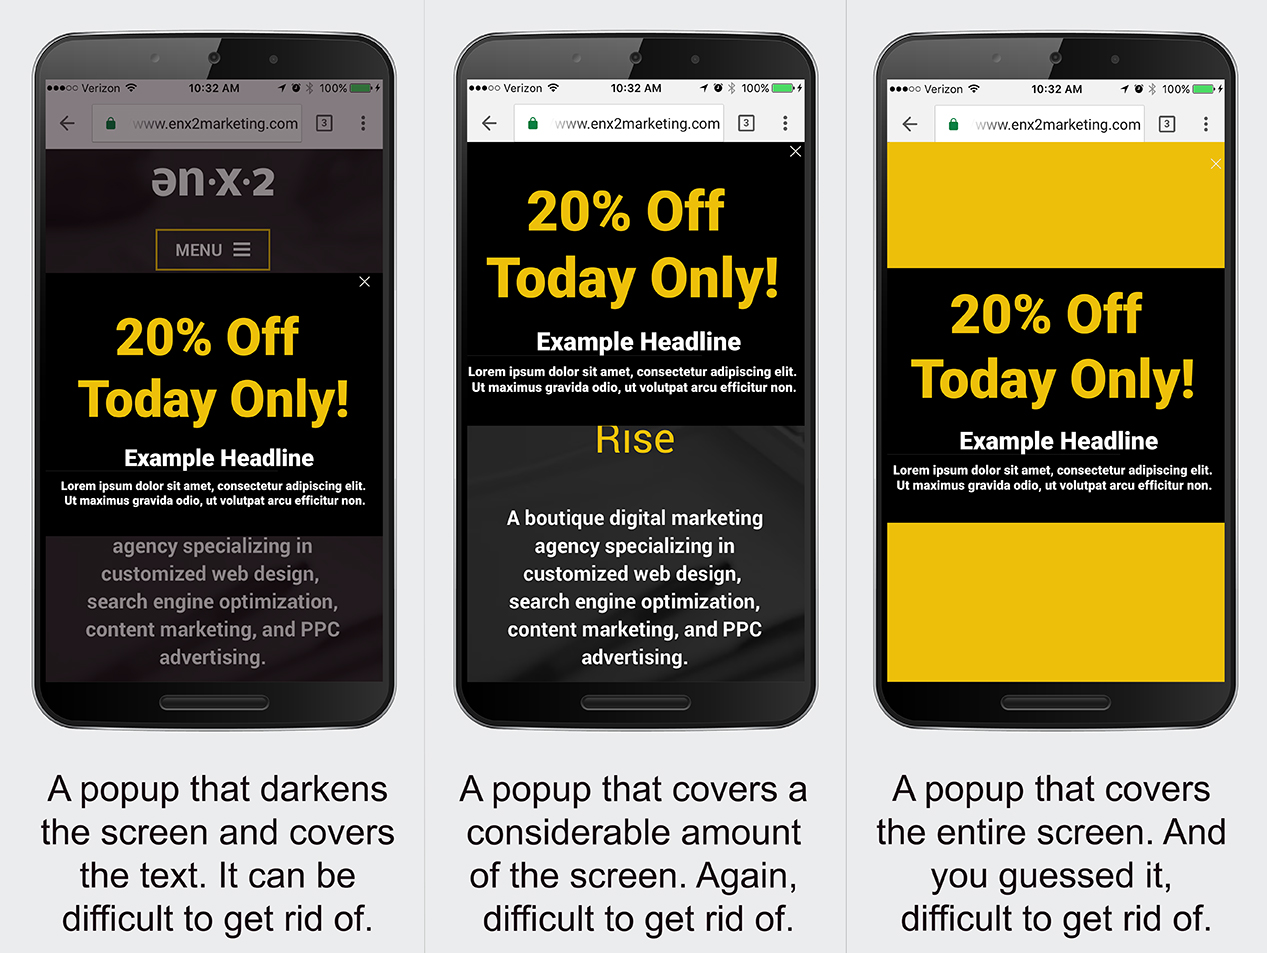 Are Chat Boxes Considered Intrusive Interstitials? - intrusive interstitials penalty enx2 marketing